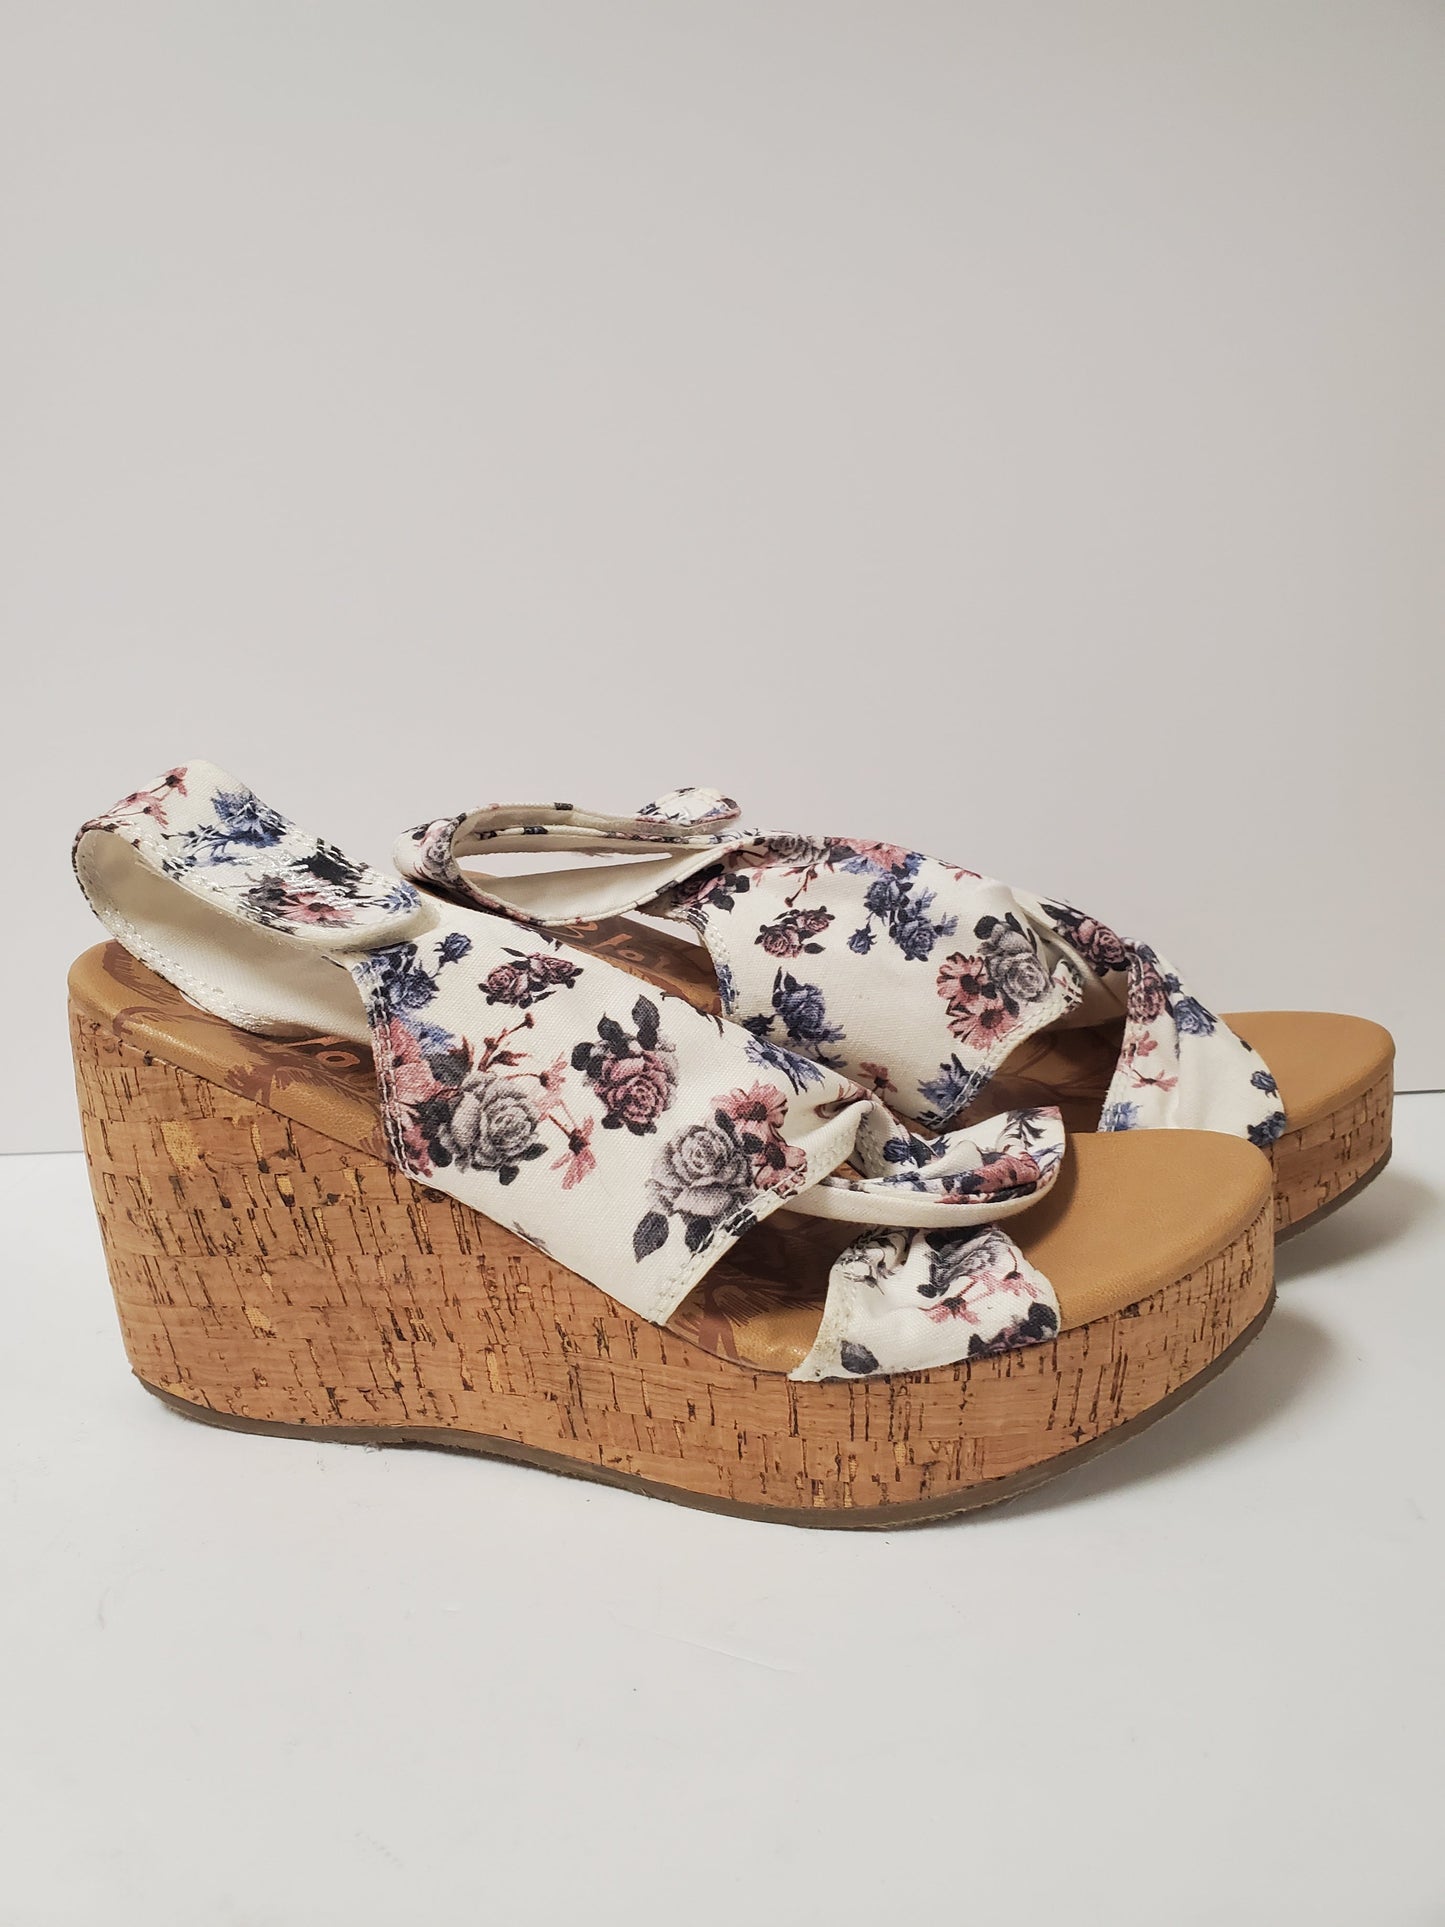 Sandals Heels Wedge By Blowfish  Size: 9